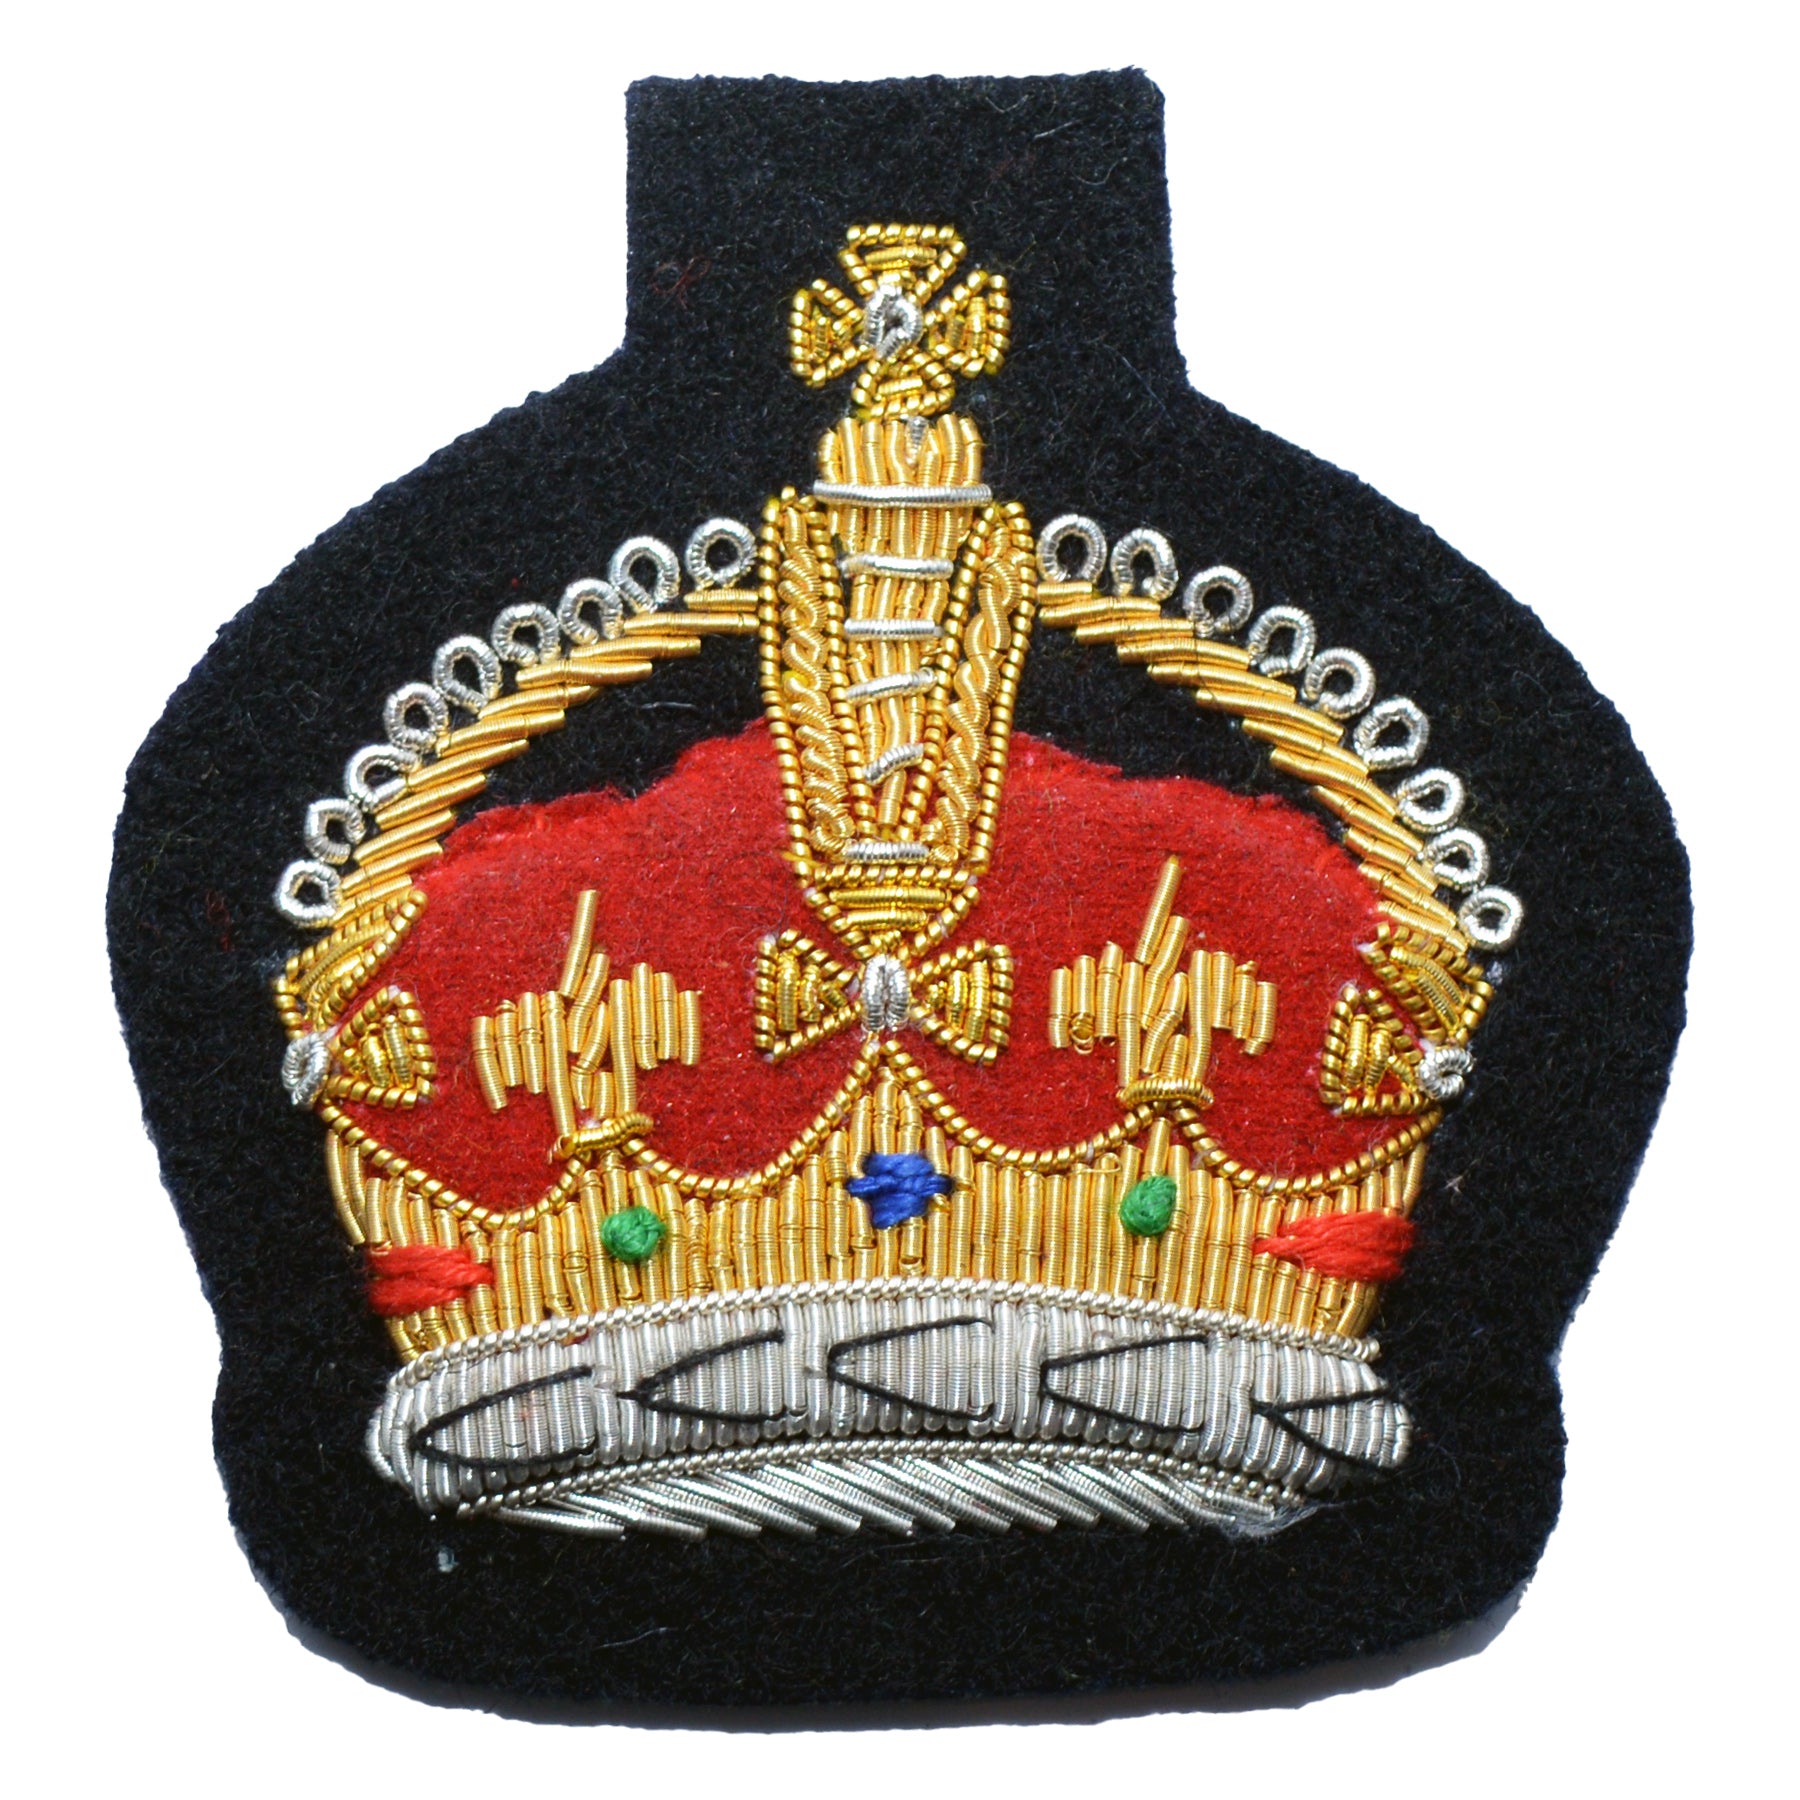 (Kings Crown) Royal Hospital Chelsea Large Crown Rank Badge Warrant Officer Class 2 (WO2) and NCO British Army